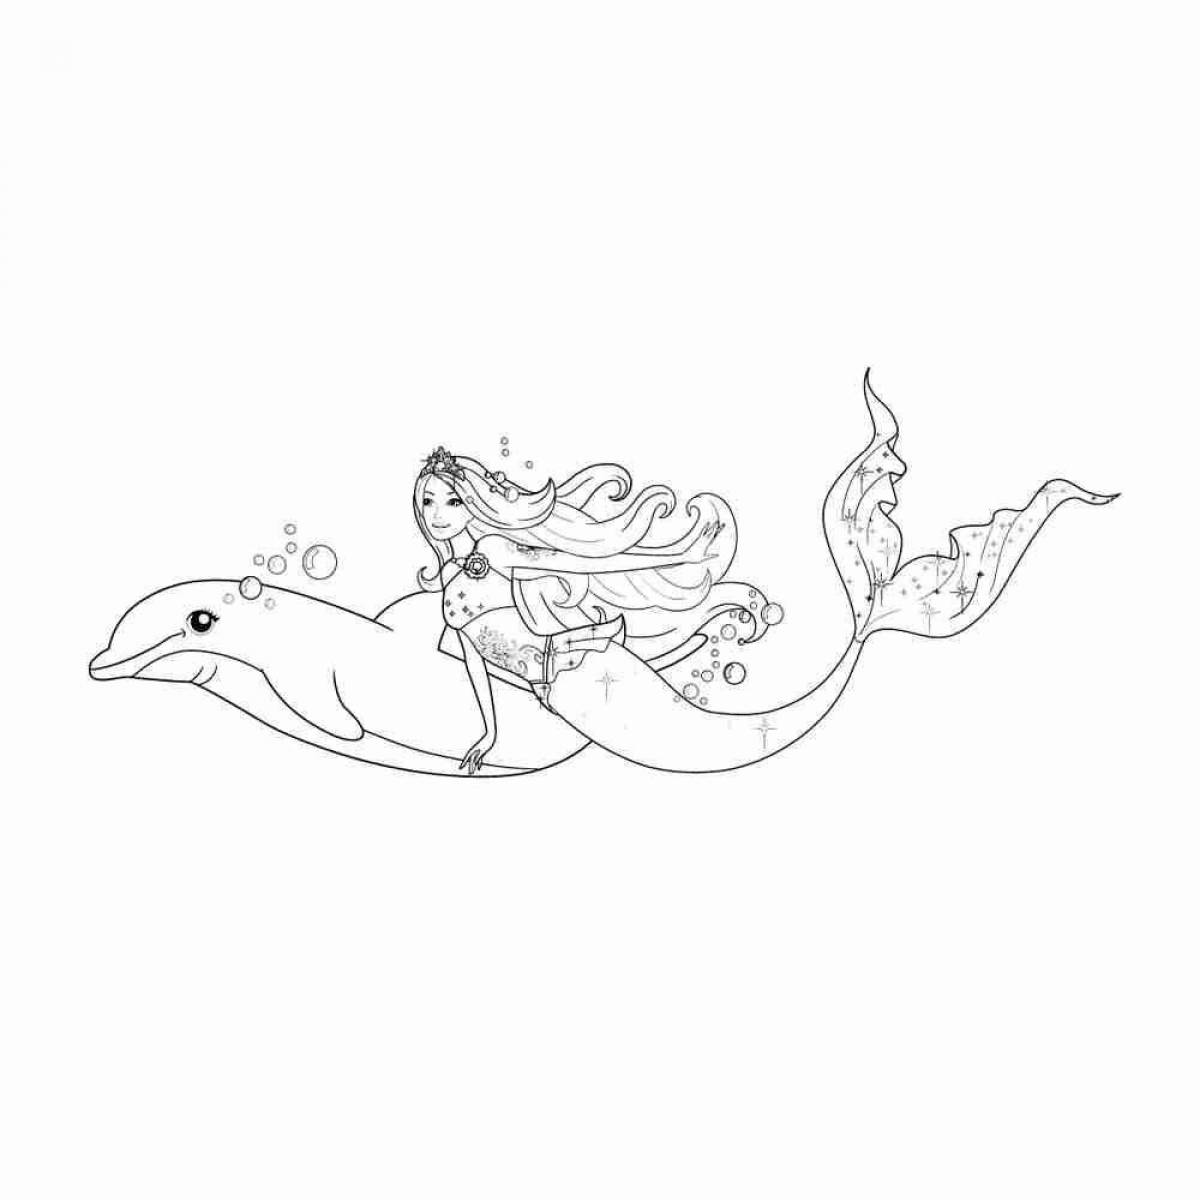 Delightful coloring mermaid and dolphin